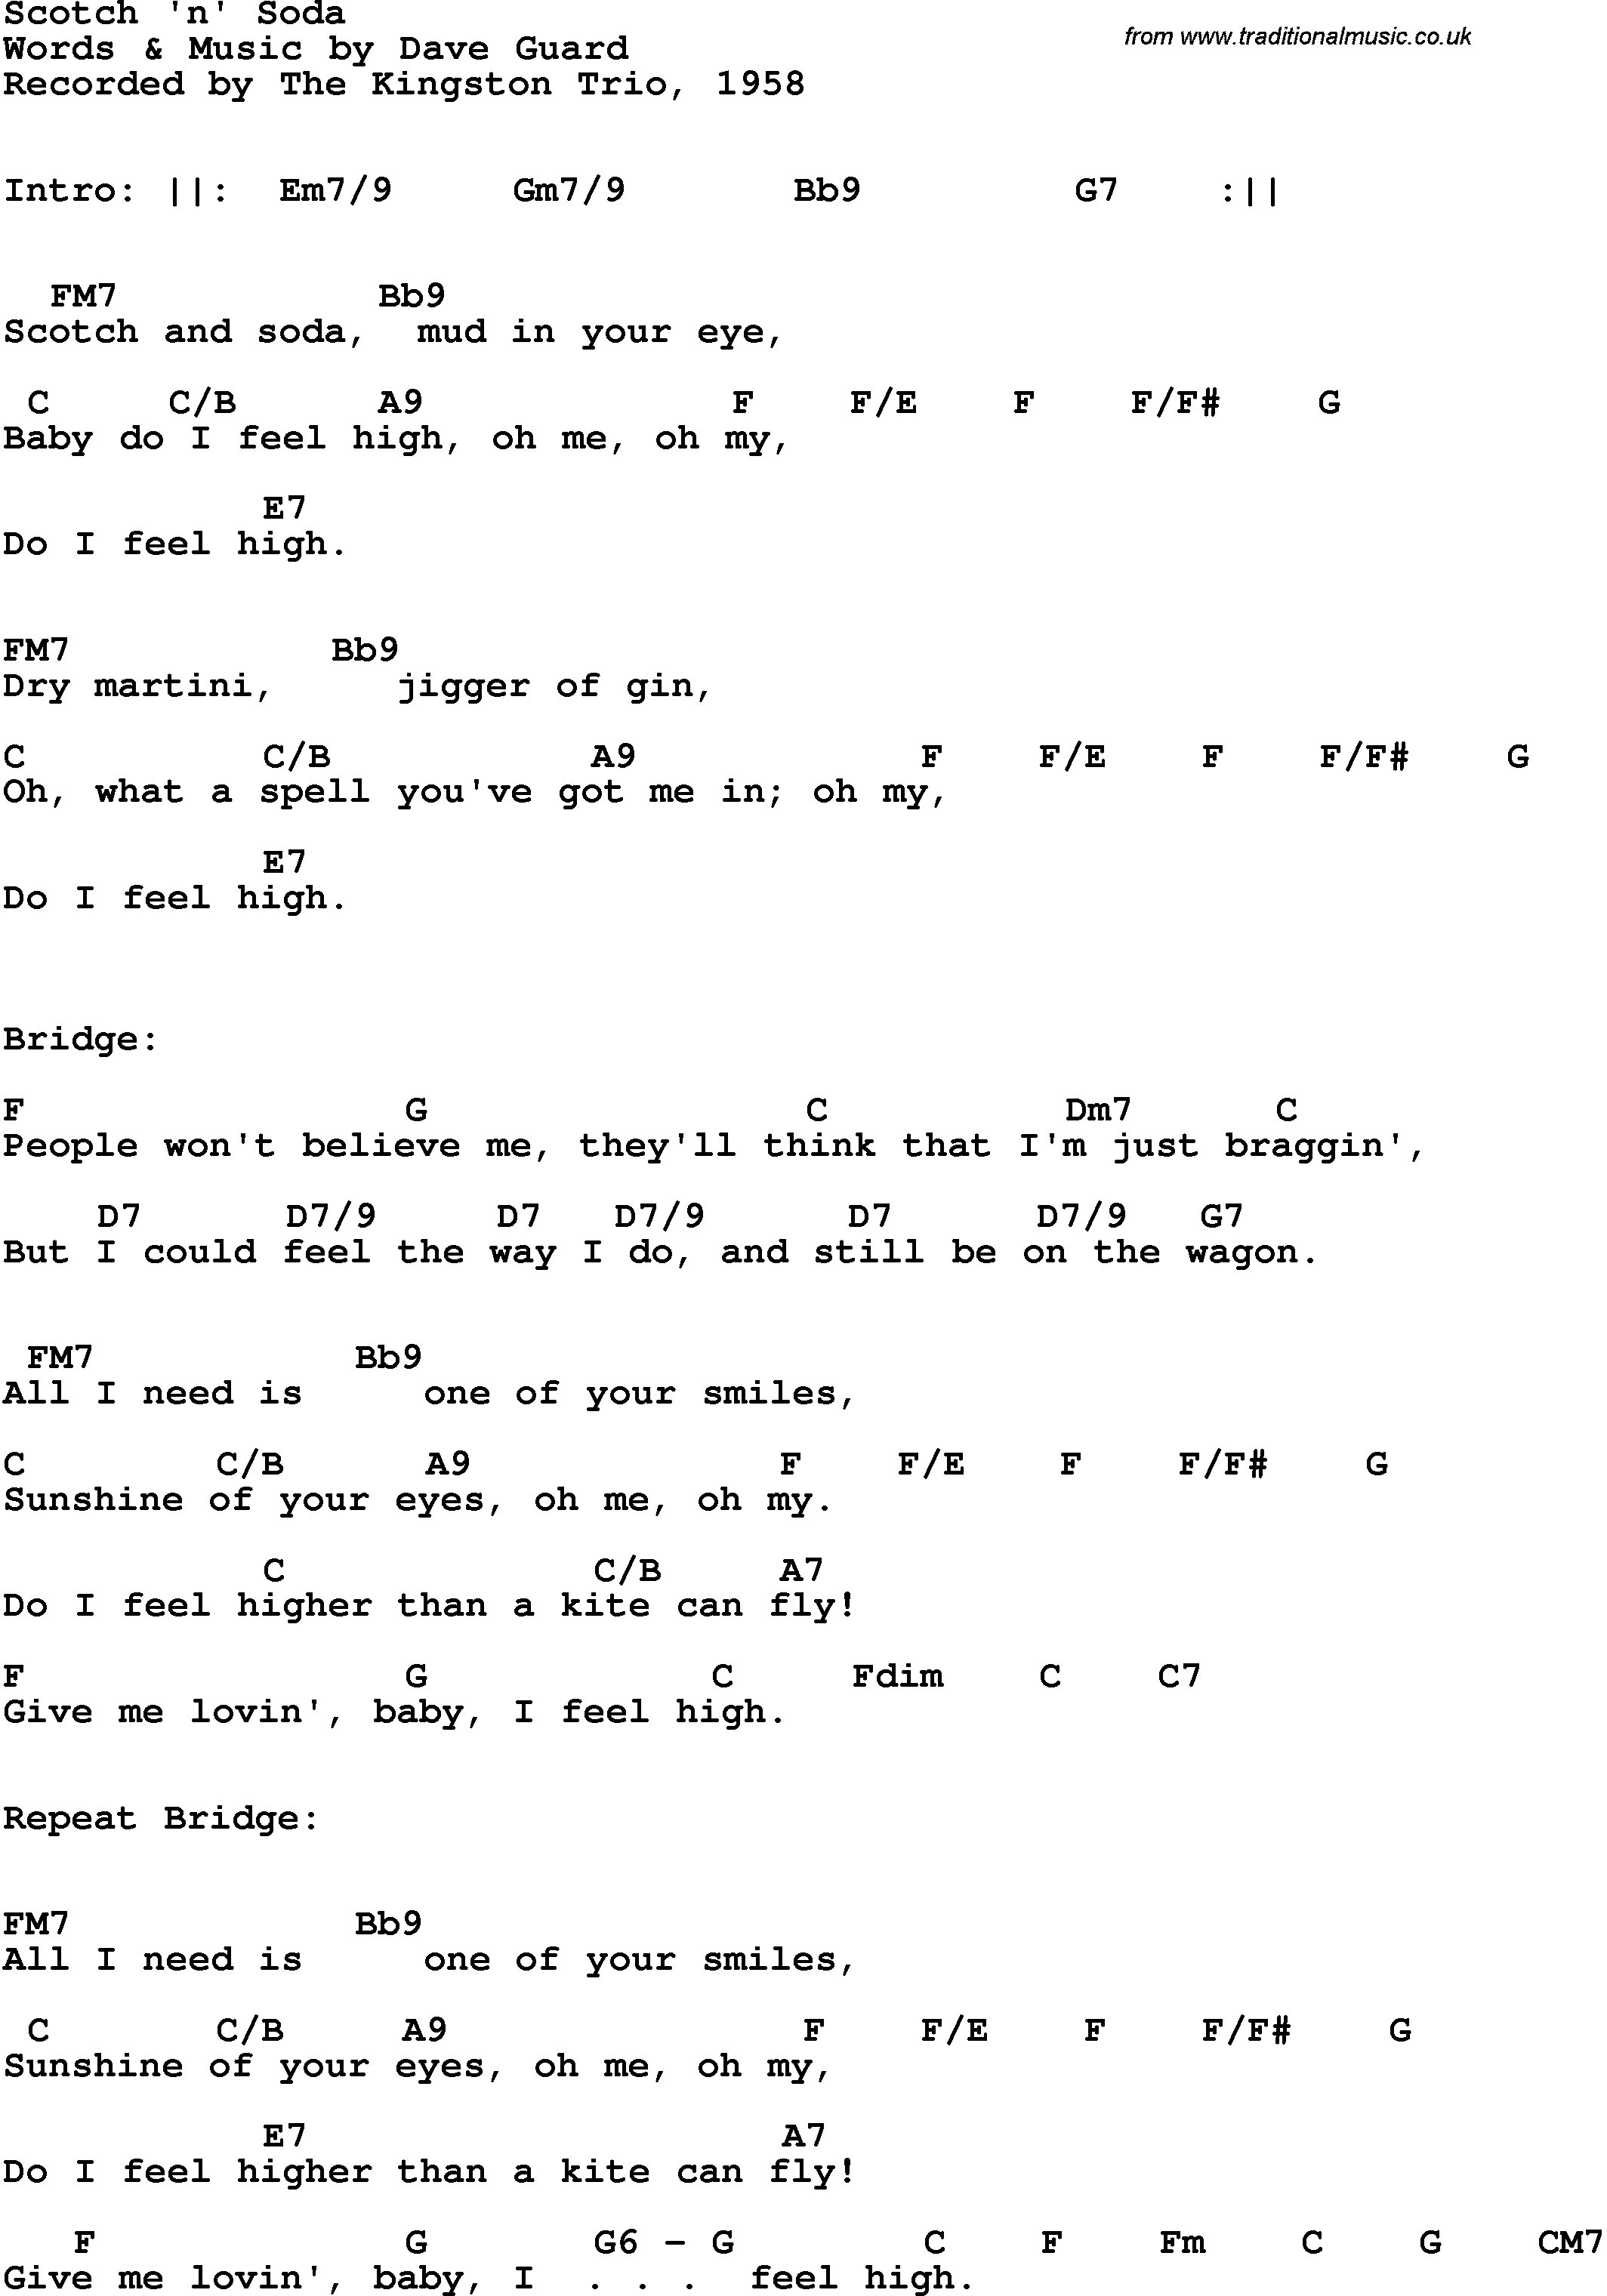 Song Lyrics with guitar chords for Scotch 'n Soda - The Kingston Trio, 1962